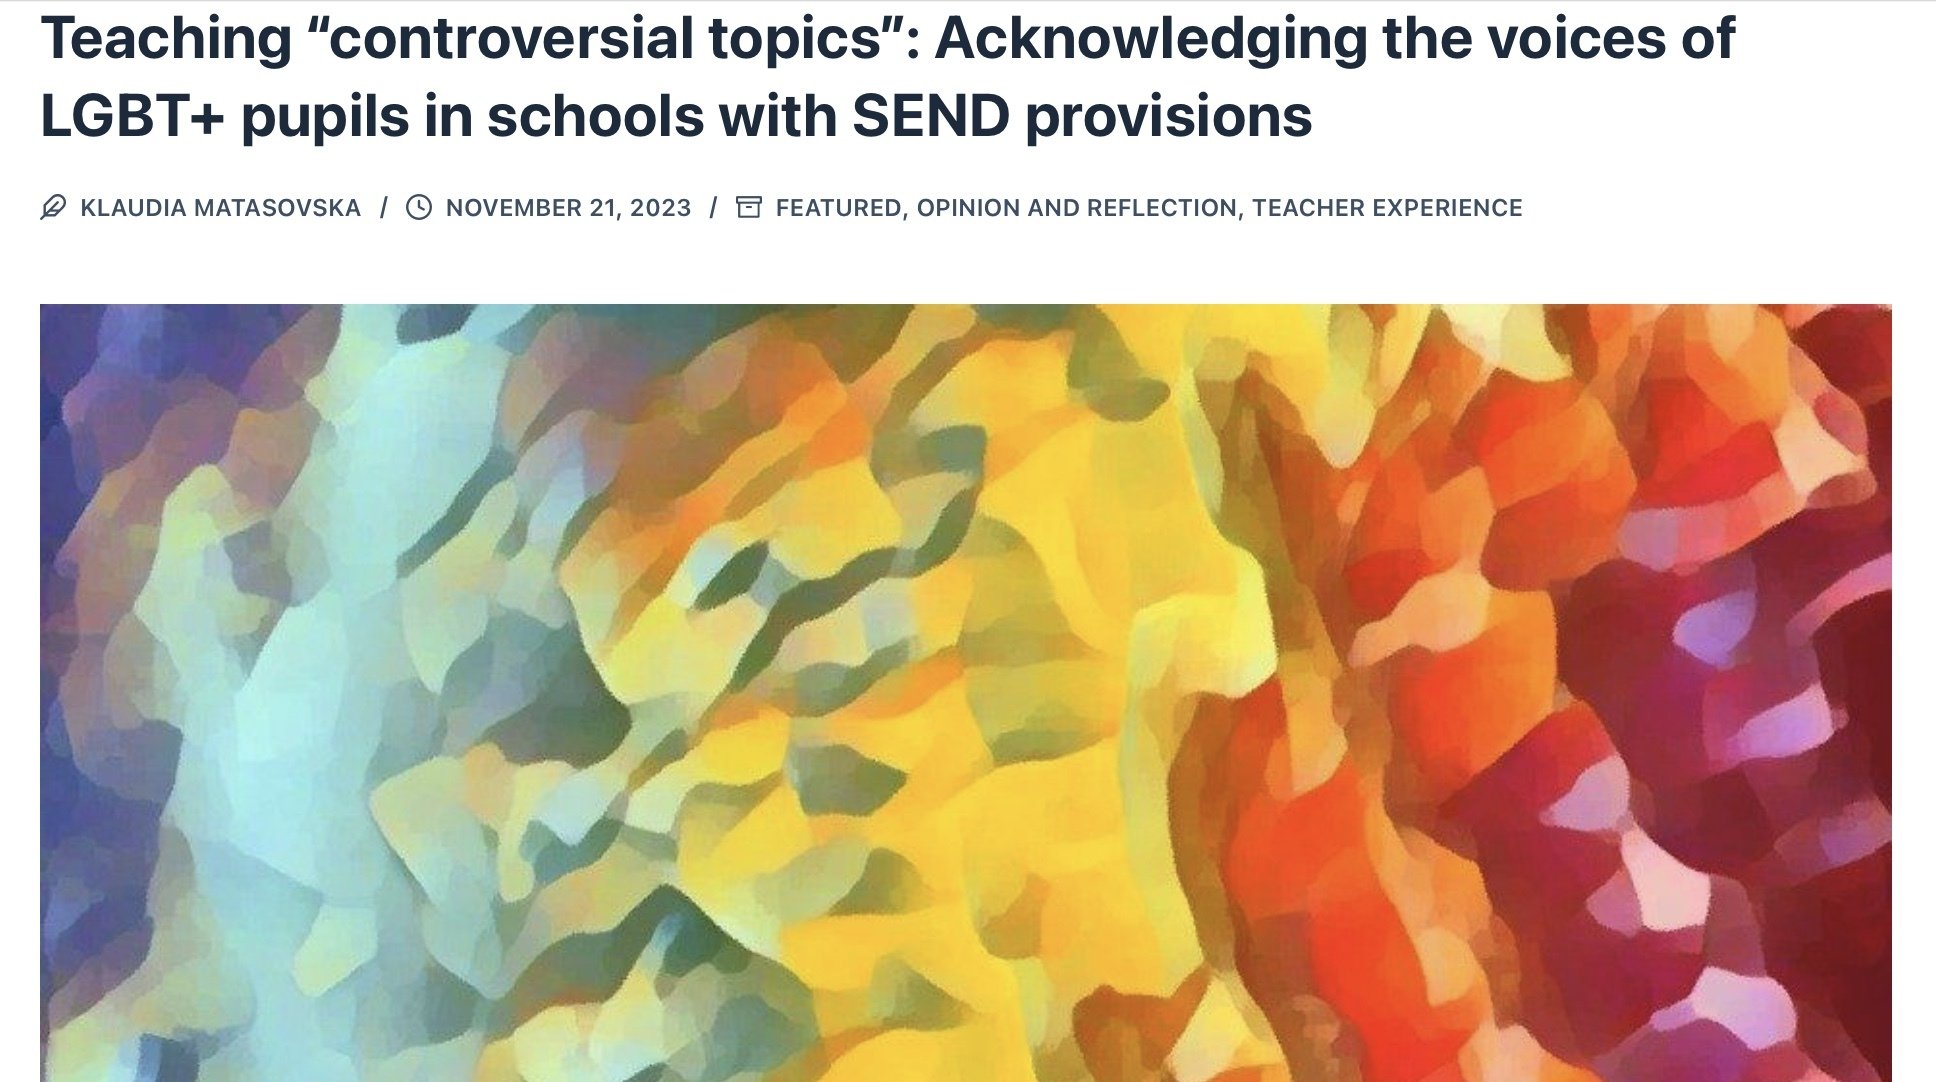 Teaching “controversial topics”: Acknowledging the voices of LGBT+ pupils in schools with SEND provisions